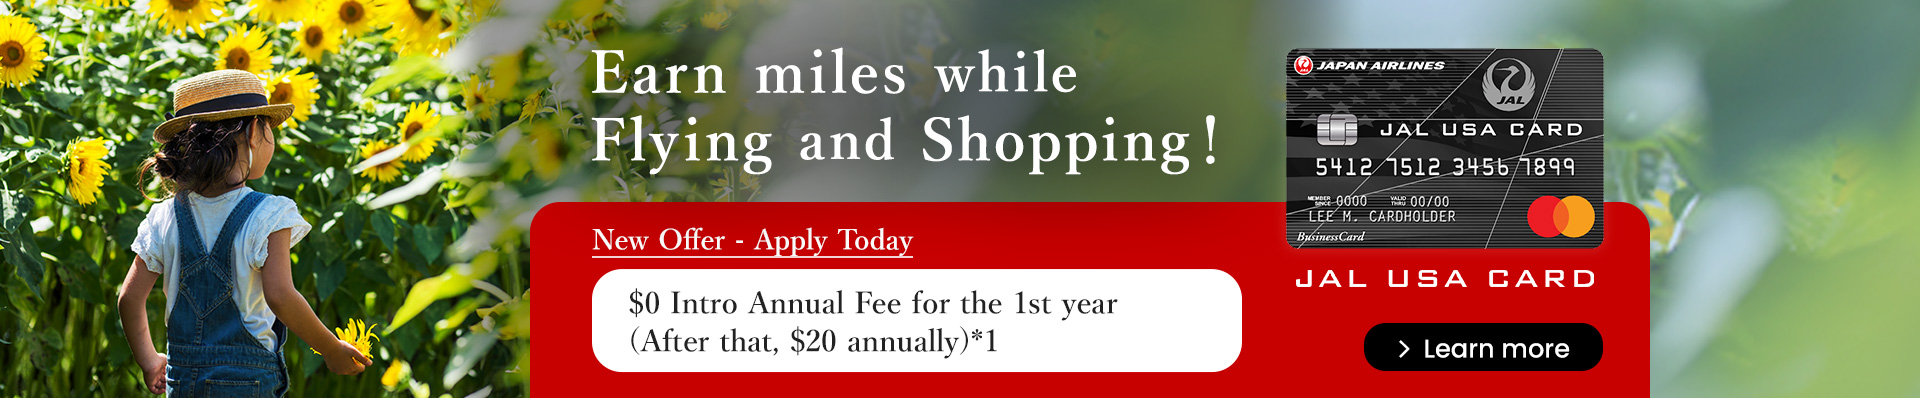 Earn Miles while Flying and Shopping! New Offer- Apply Today
 $0 Intro Annual Fee for the 1st year After that, $20 annually*1 Plus Earn up to 15,000 Bonus Miles*2 Learn more